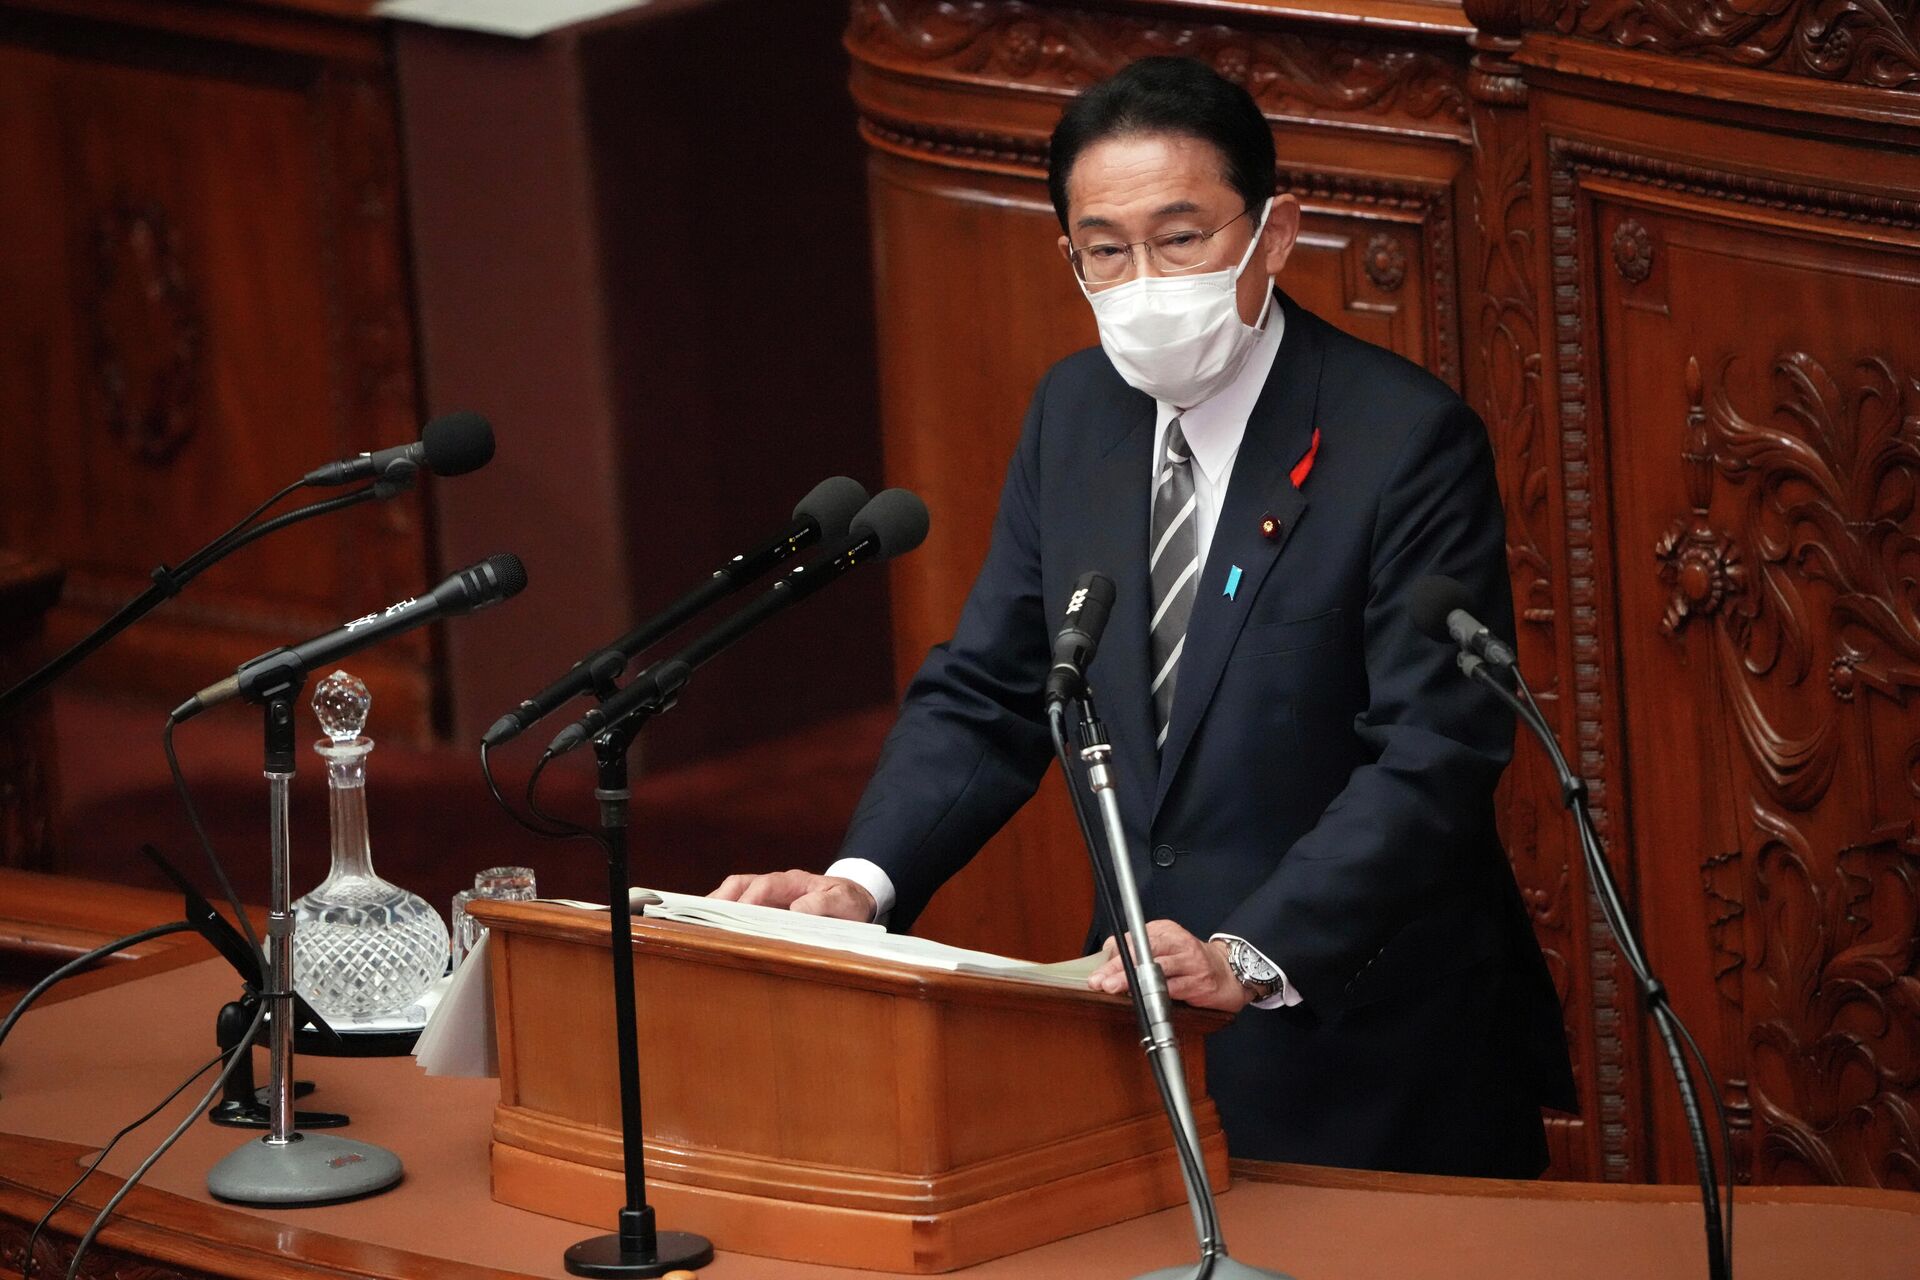 Japanese Prime Minister Fumio Kishida delivers his first policy speech during an extraordinary Diet session at the lower house of parliament Friday, Oct. 8, 2021, in Tokyo. - Sputnik International, 1920, 17.10.2021